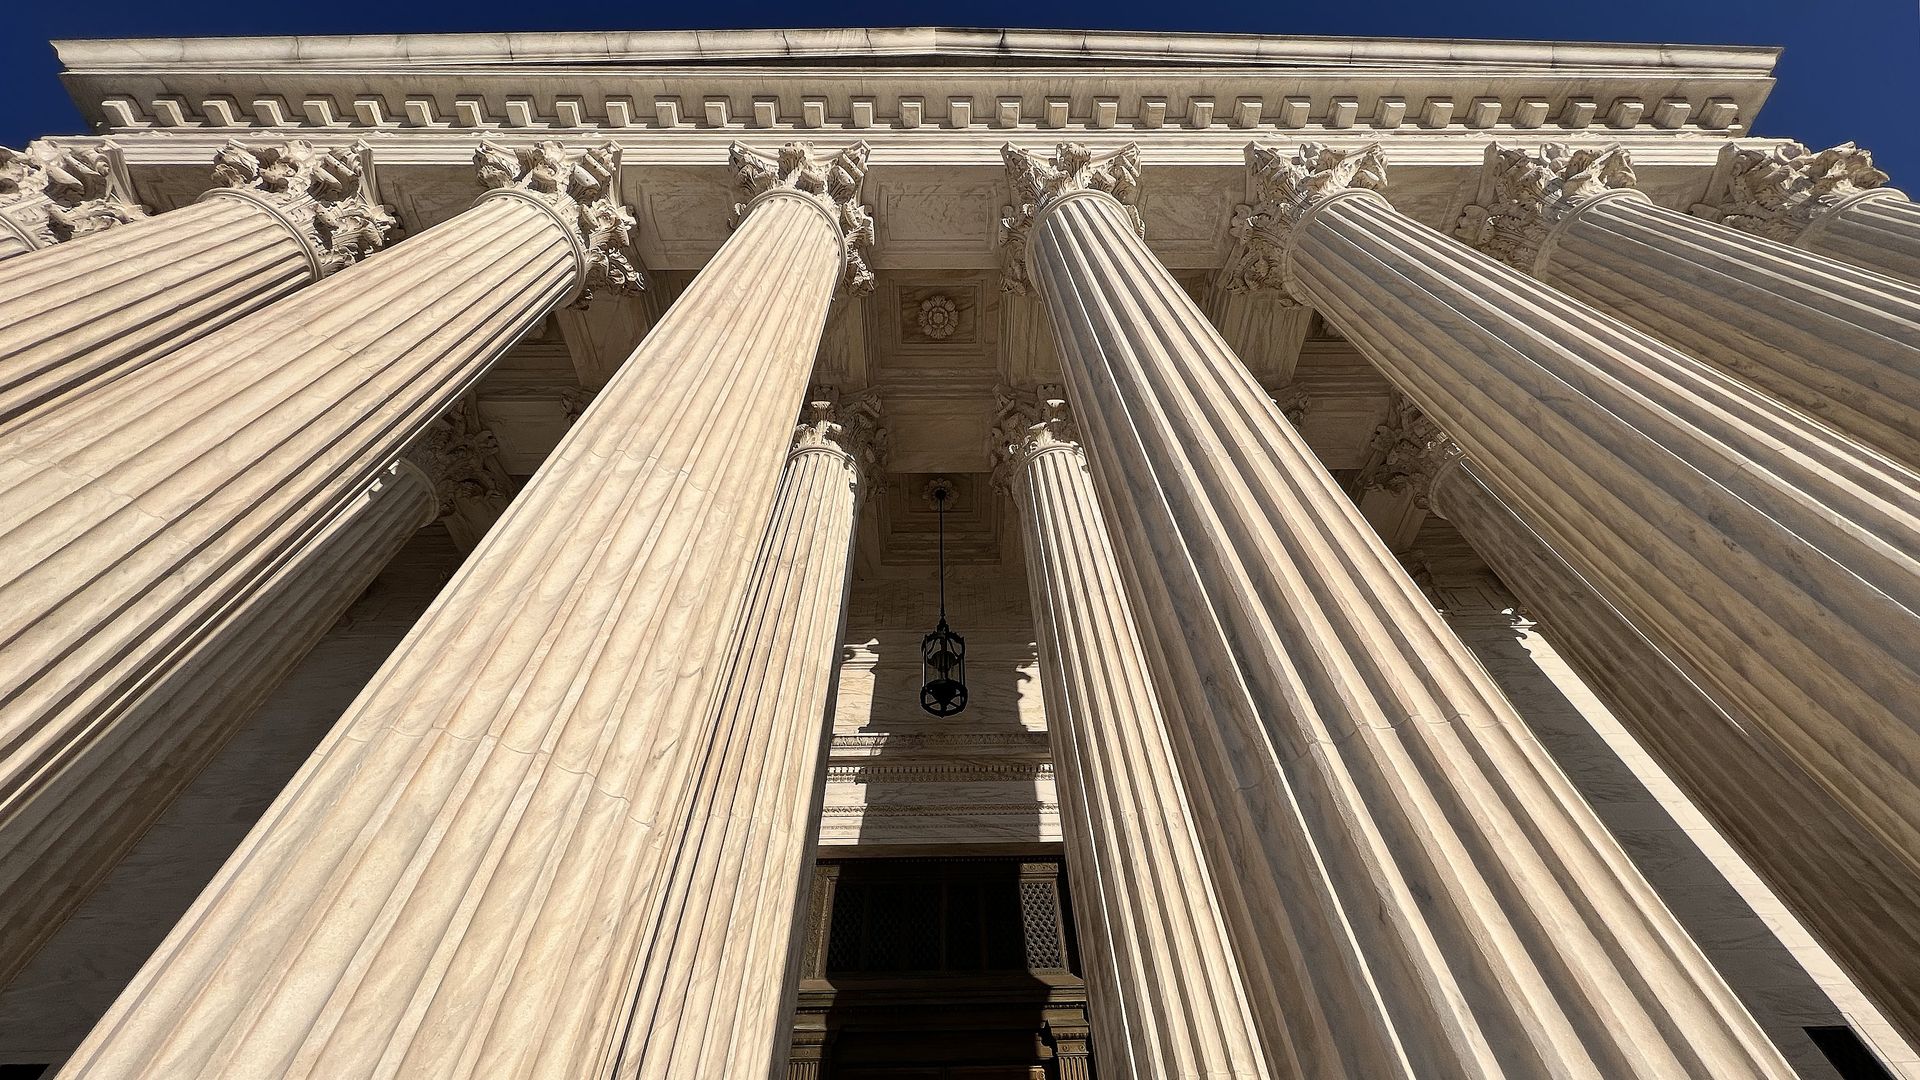 The Supreme Court pillars are seen from below.